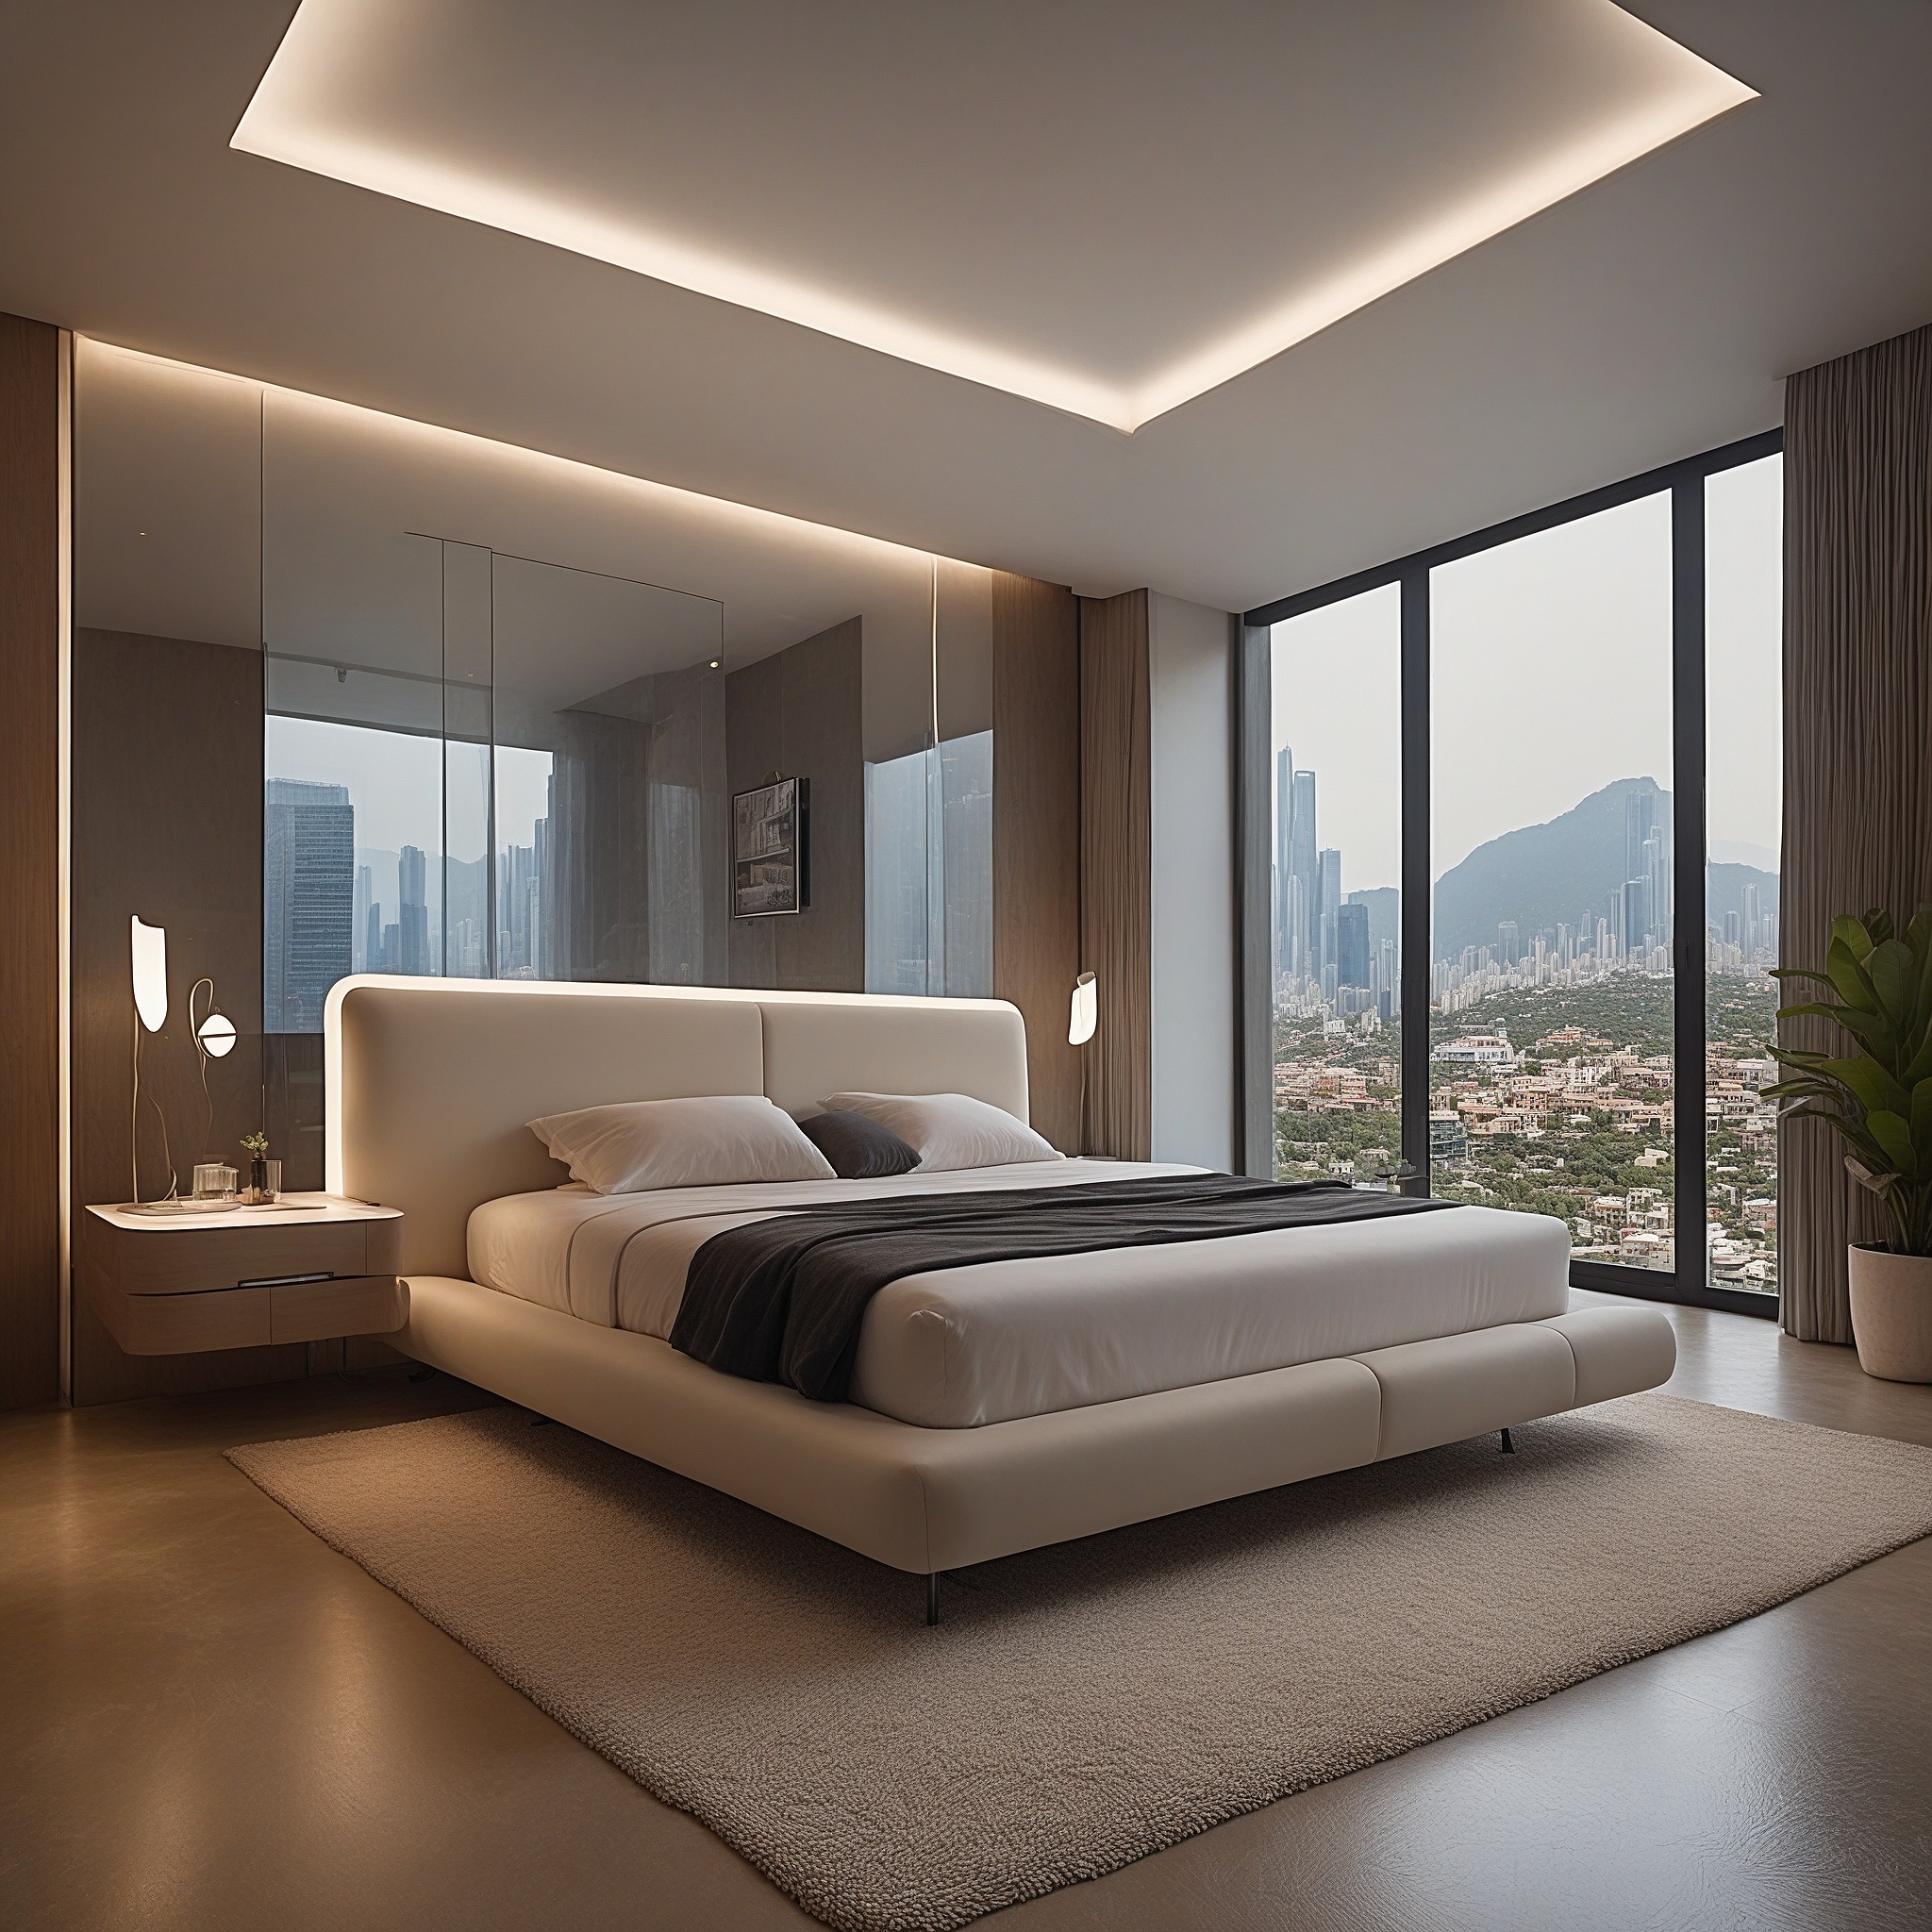 Modern Futuristic Bedroom, Bed With a Sleek, Aerodynamic Design, Ambient Light Strips Along The Walls